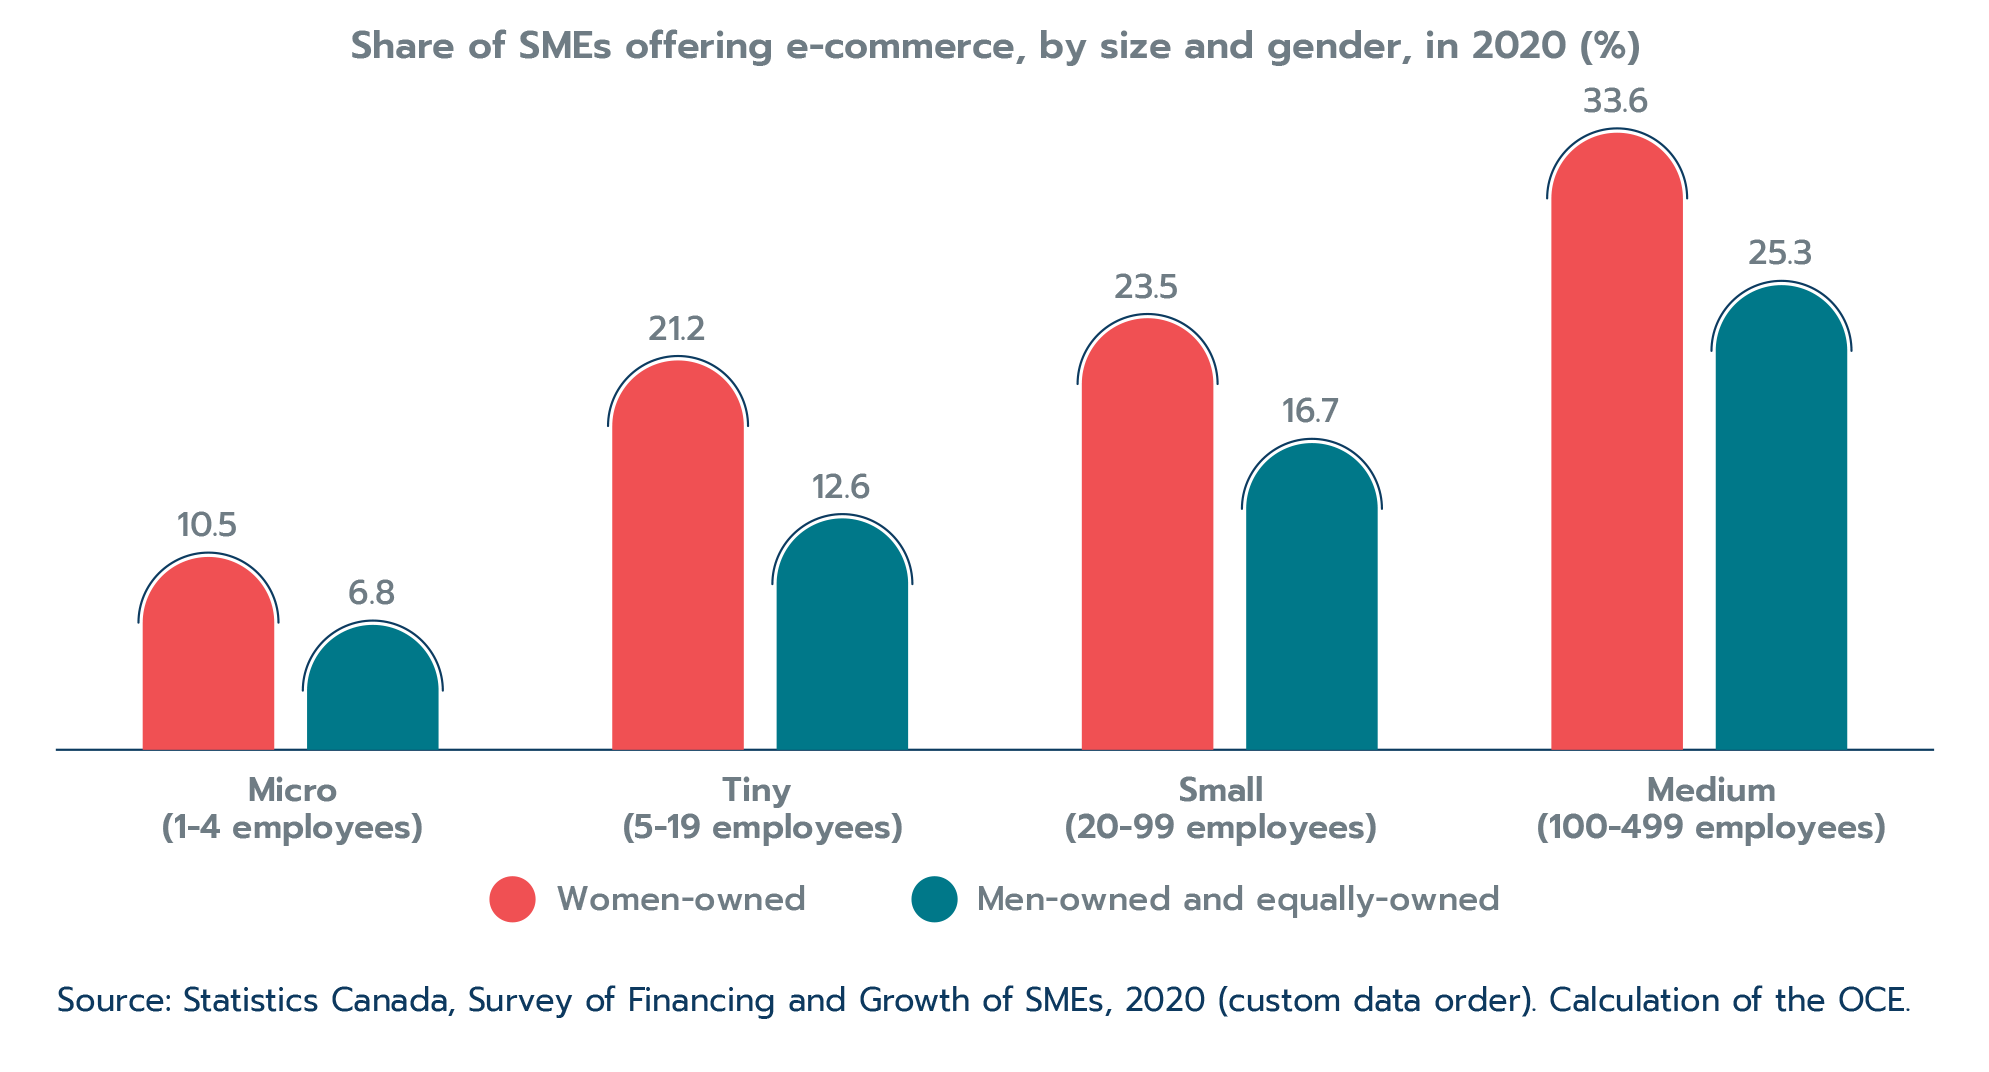 Figure 2.21: Women-owned SMEs more likely to offer e-commerce 